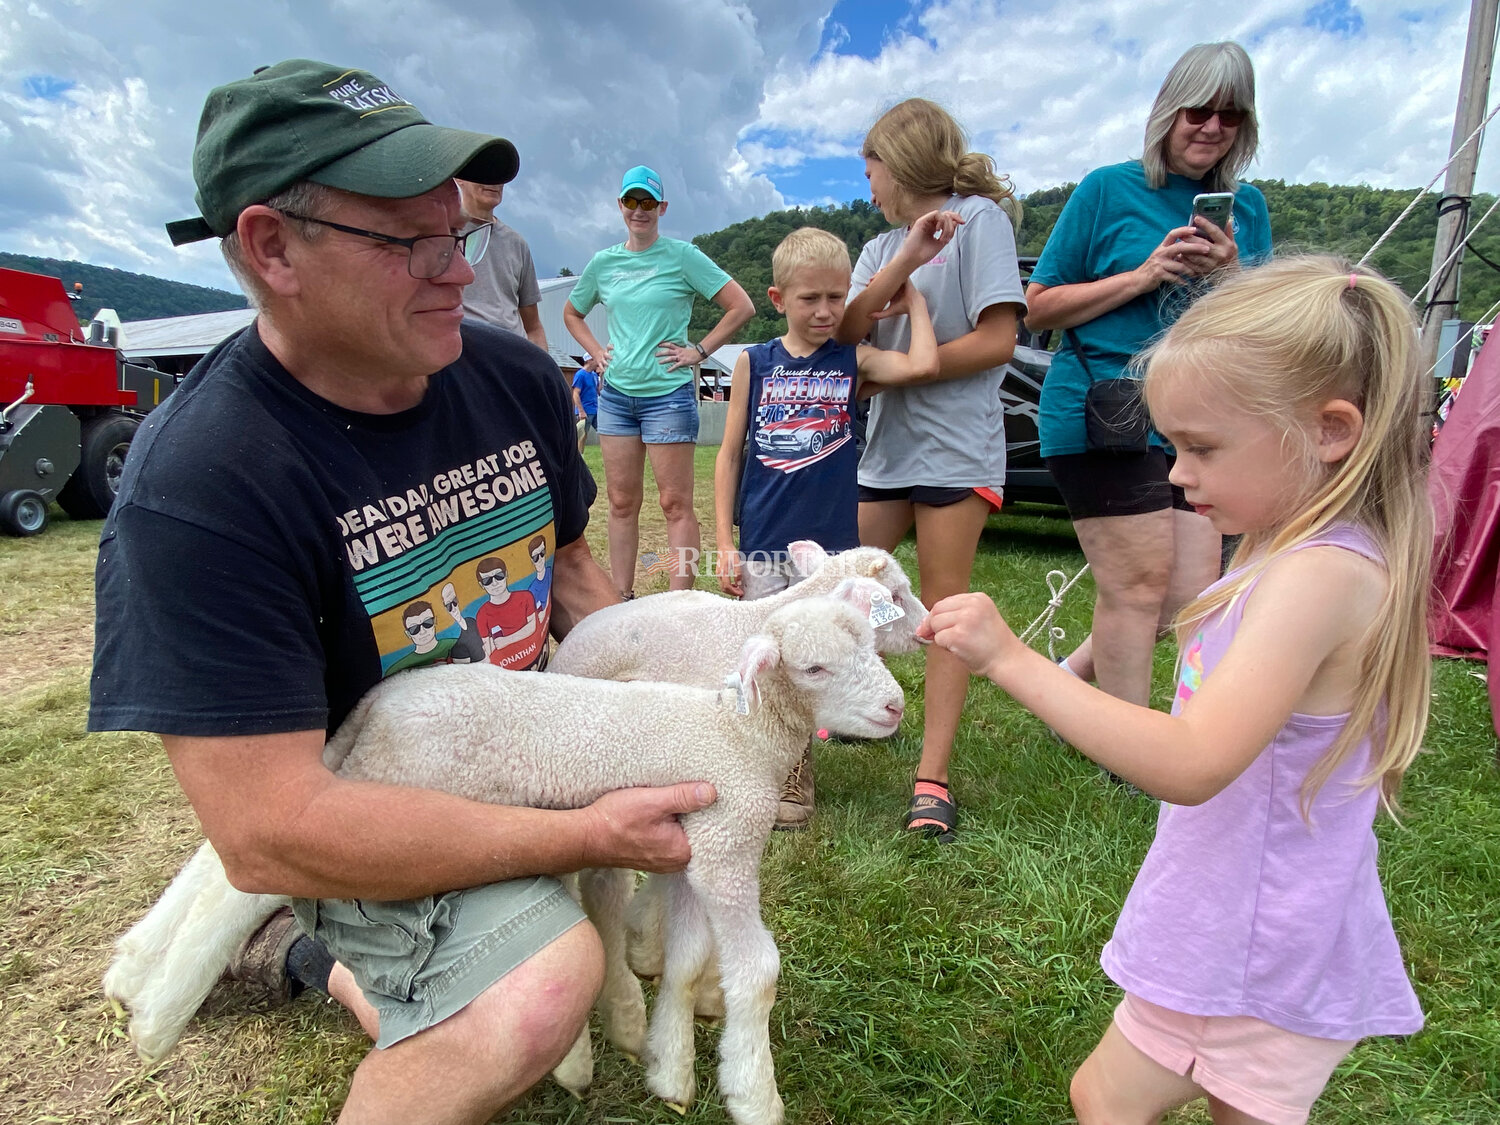 Chloe Anderson, 3, Delhi, meets Hansel and Gretel, two horned Dorset lambs exhibited at the Delaware County Fair by Don Conklin of SaJoBe Farm in Walton.